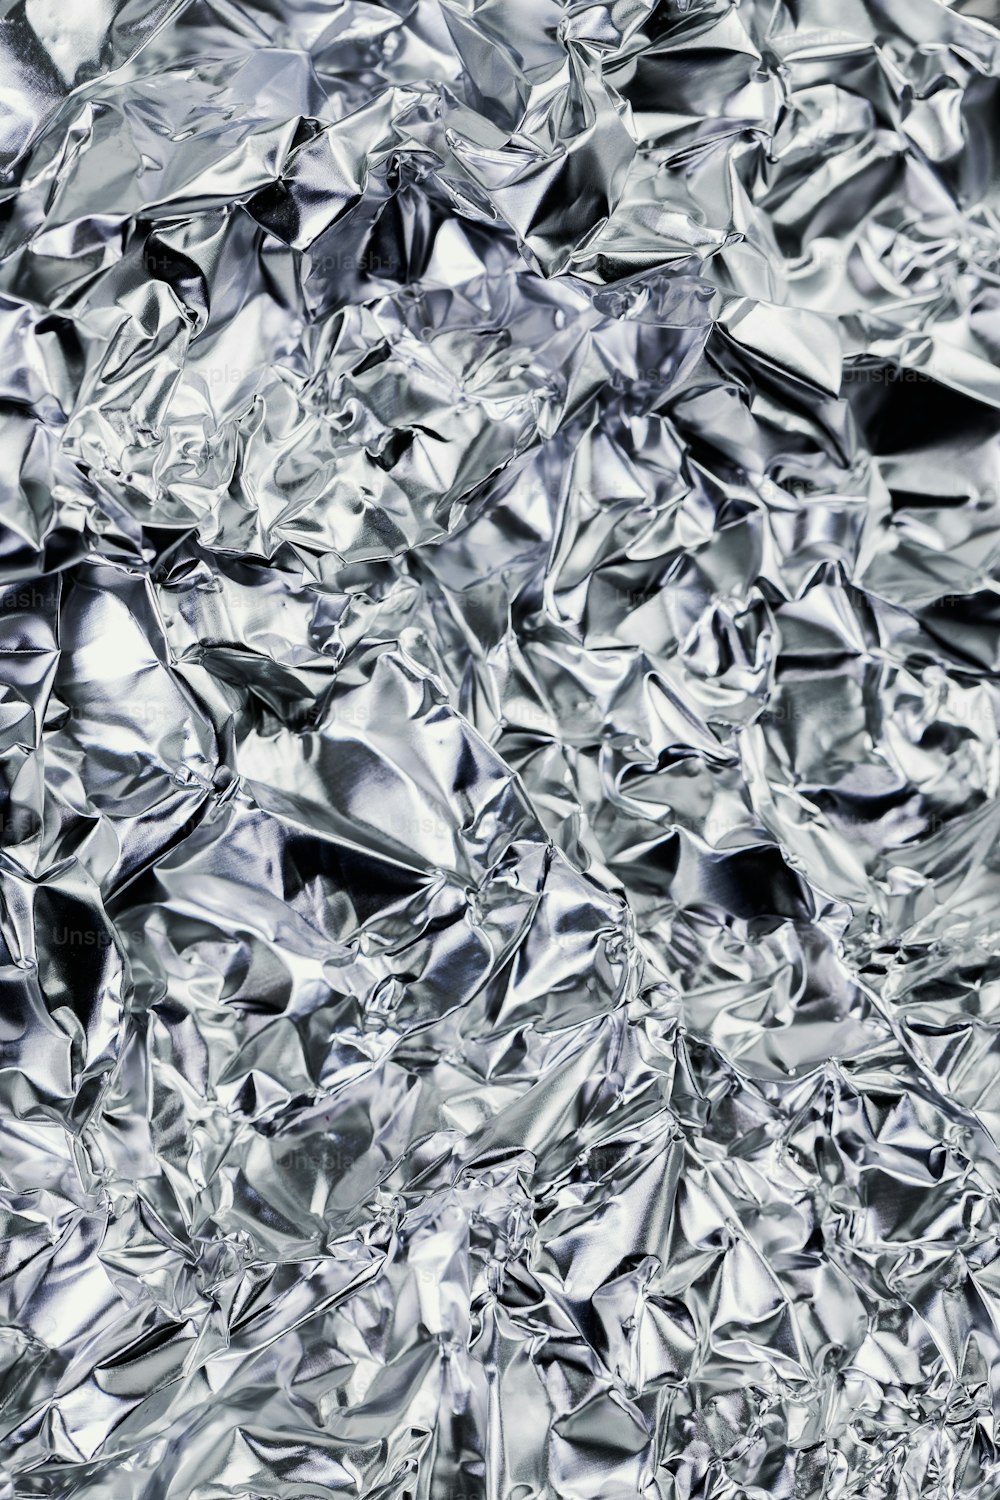 a very close up picture of a shiny surface